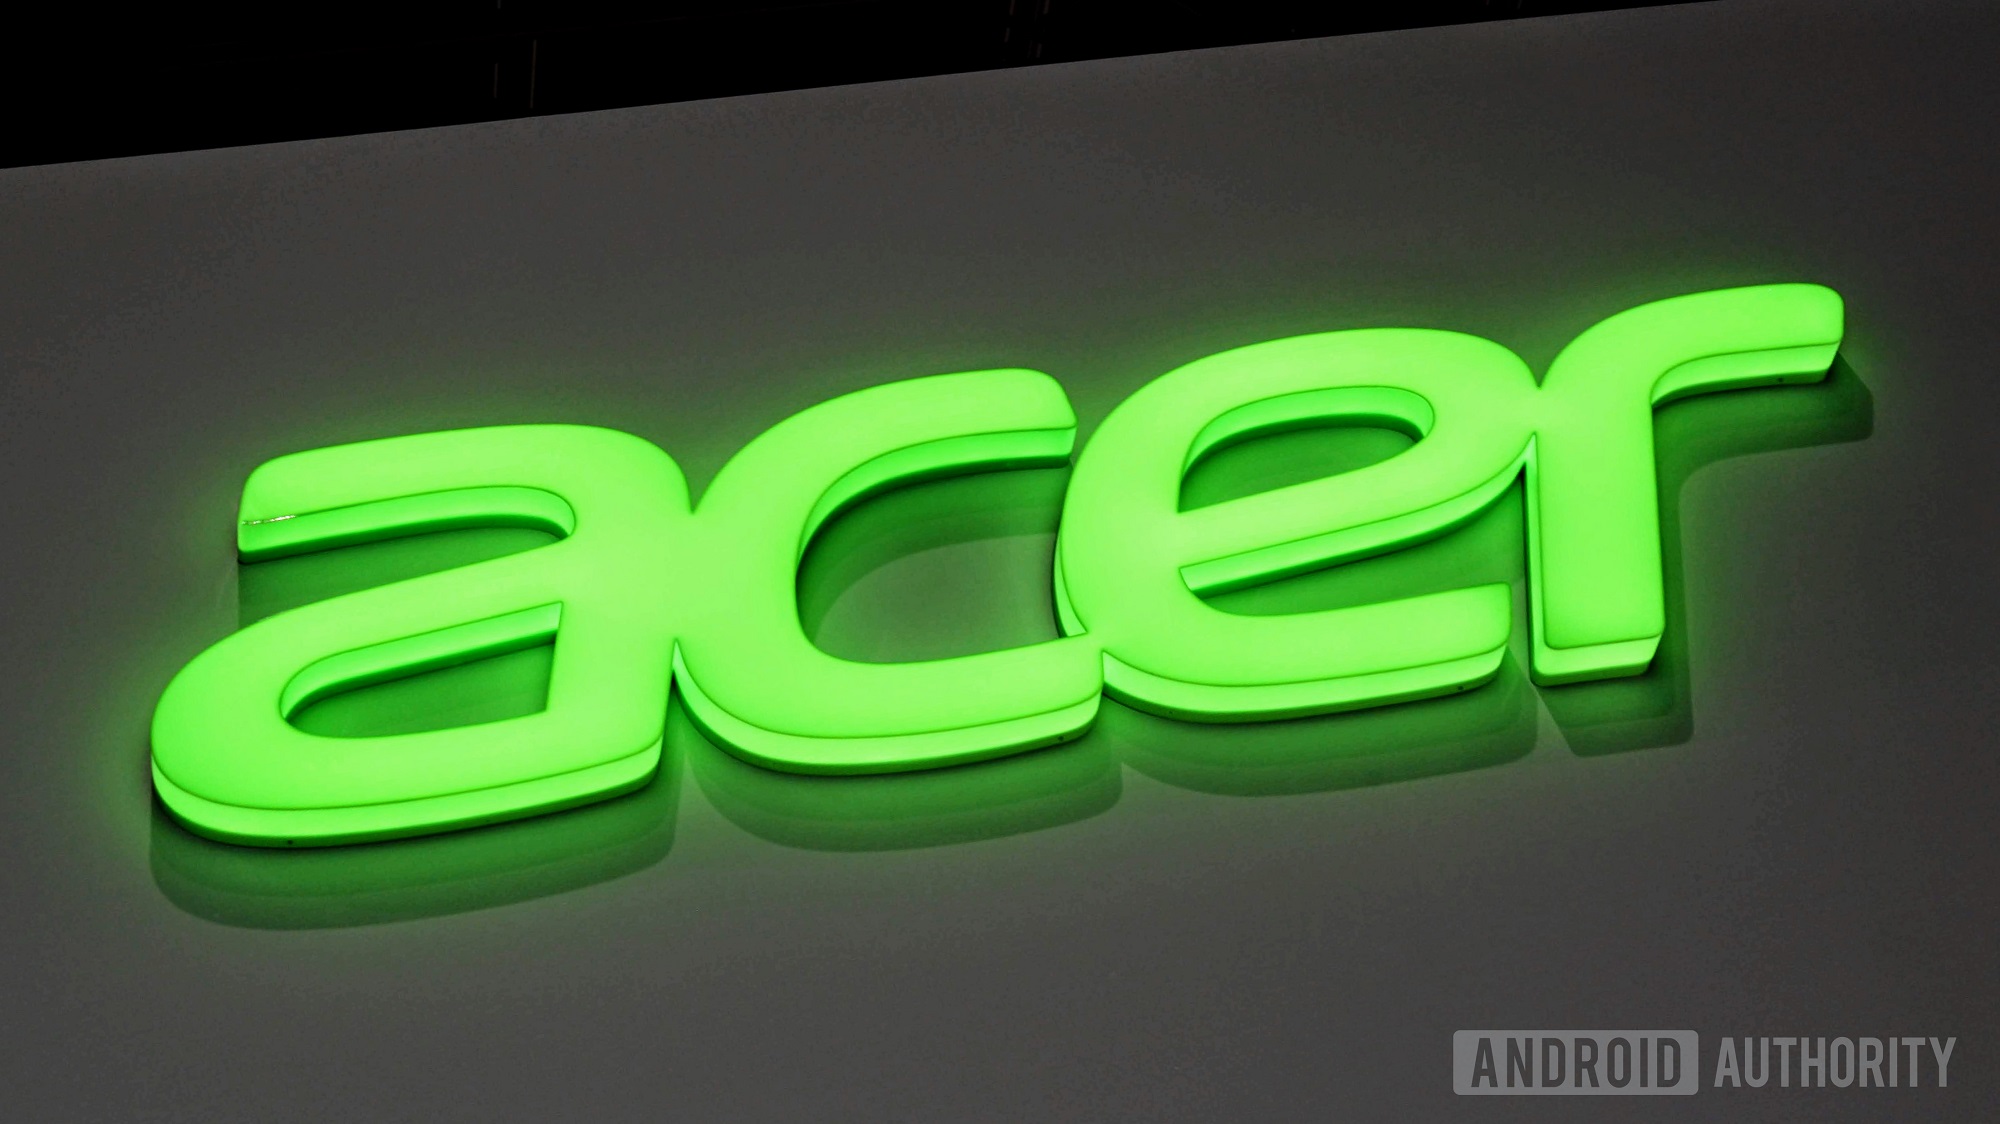 Acer logo from IFA 2018.